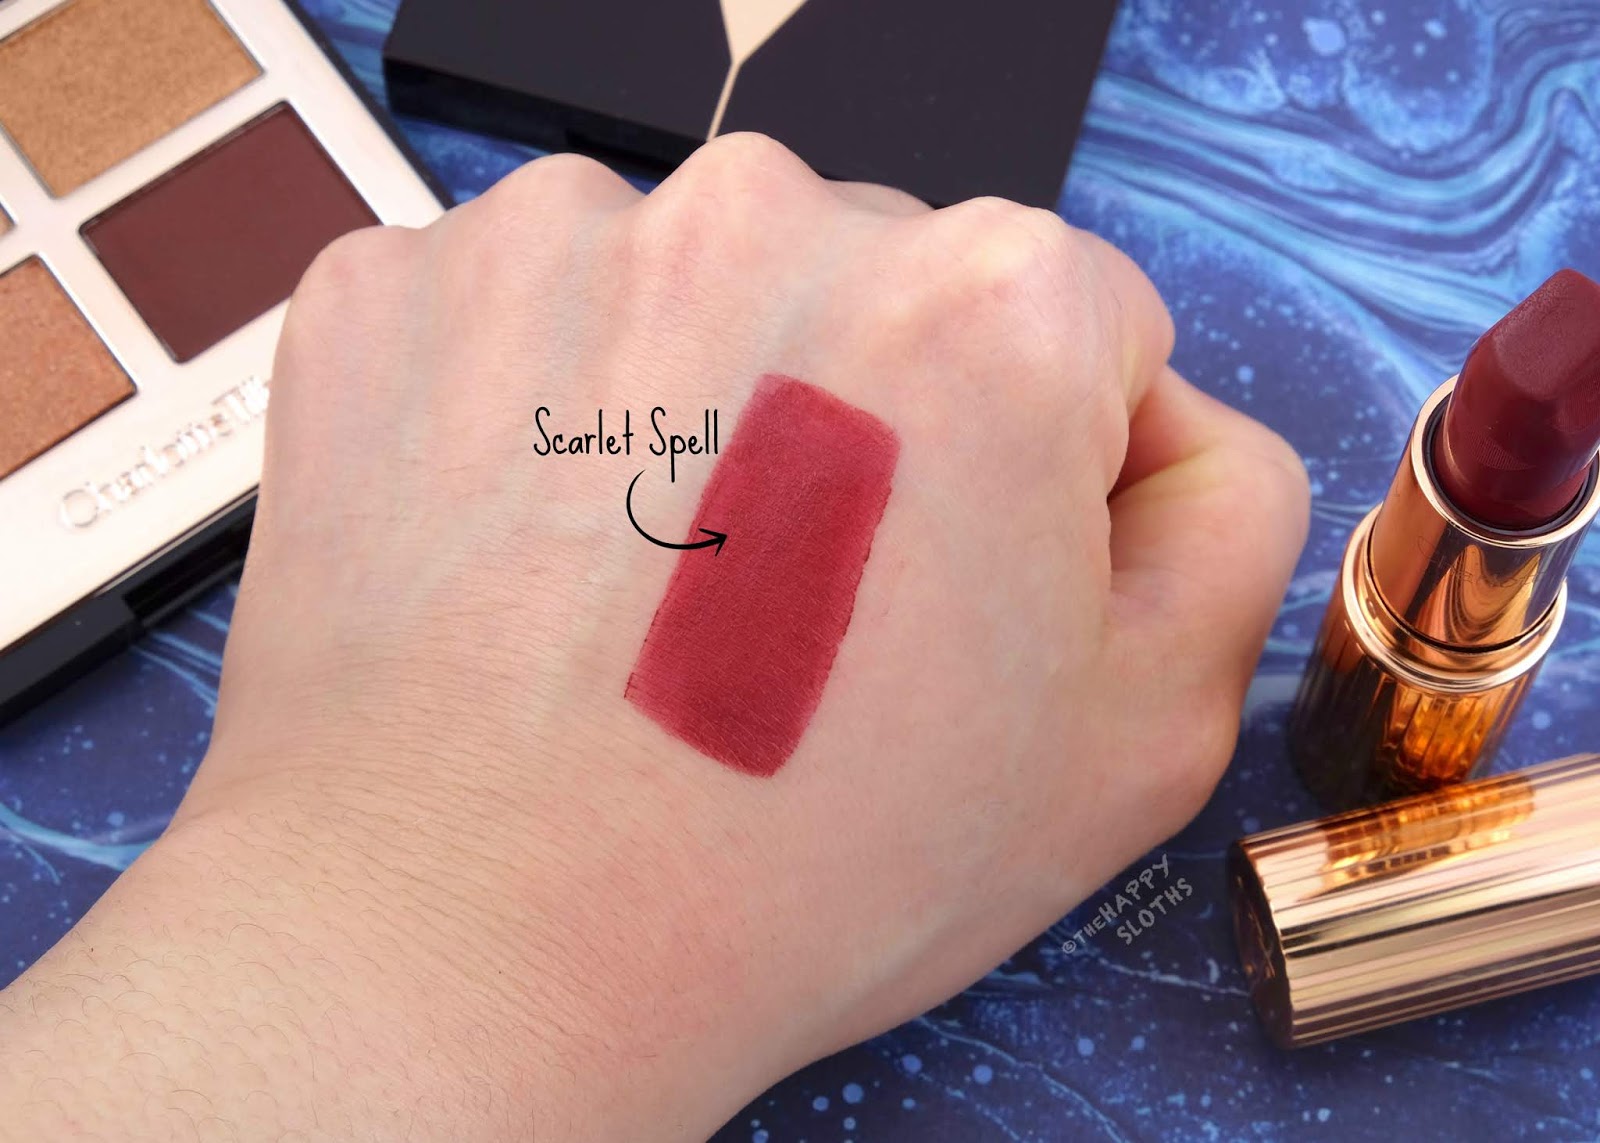 Charlotte Tilbury | *NEW* Matte Revolution Lipstick in "Scarlet Spell": Review and Swatches